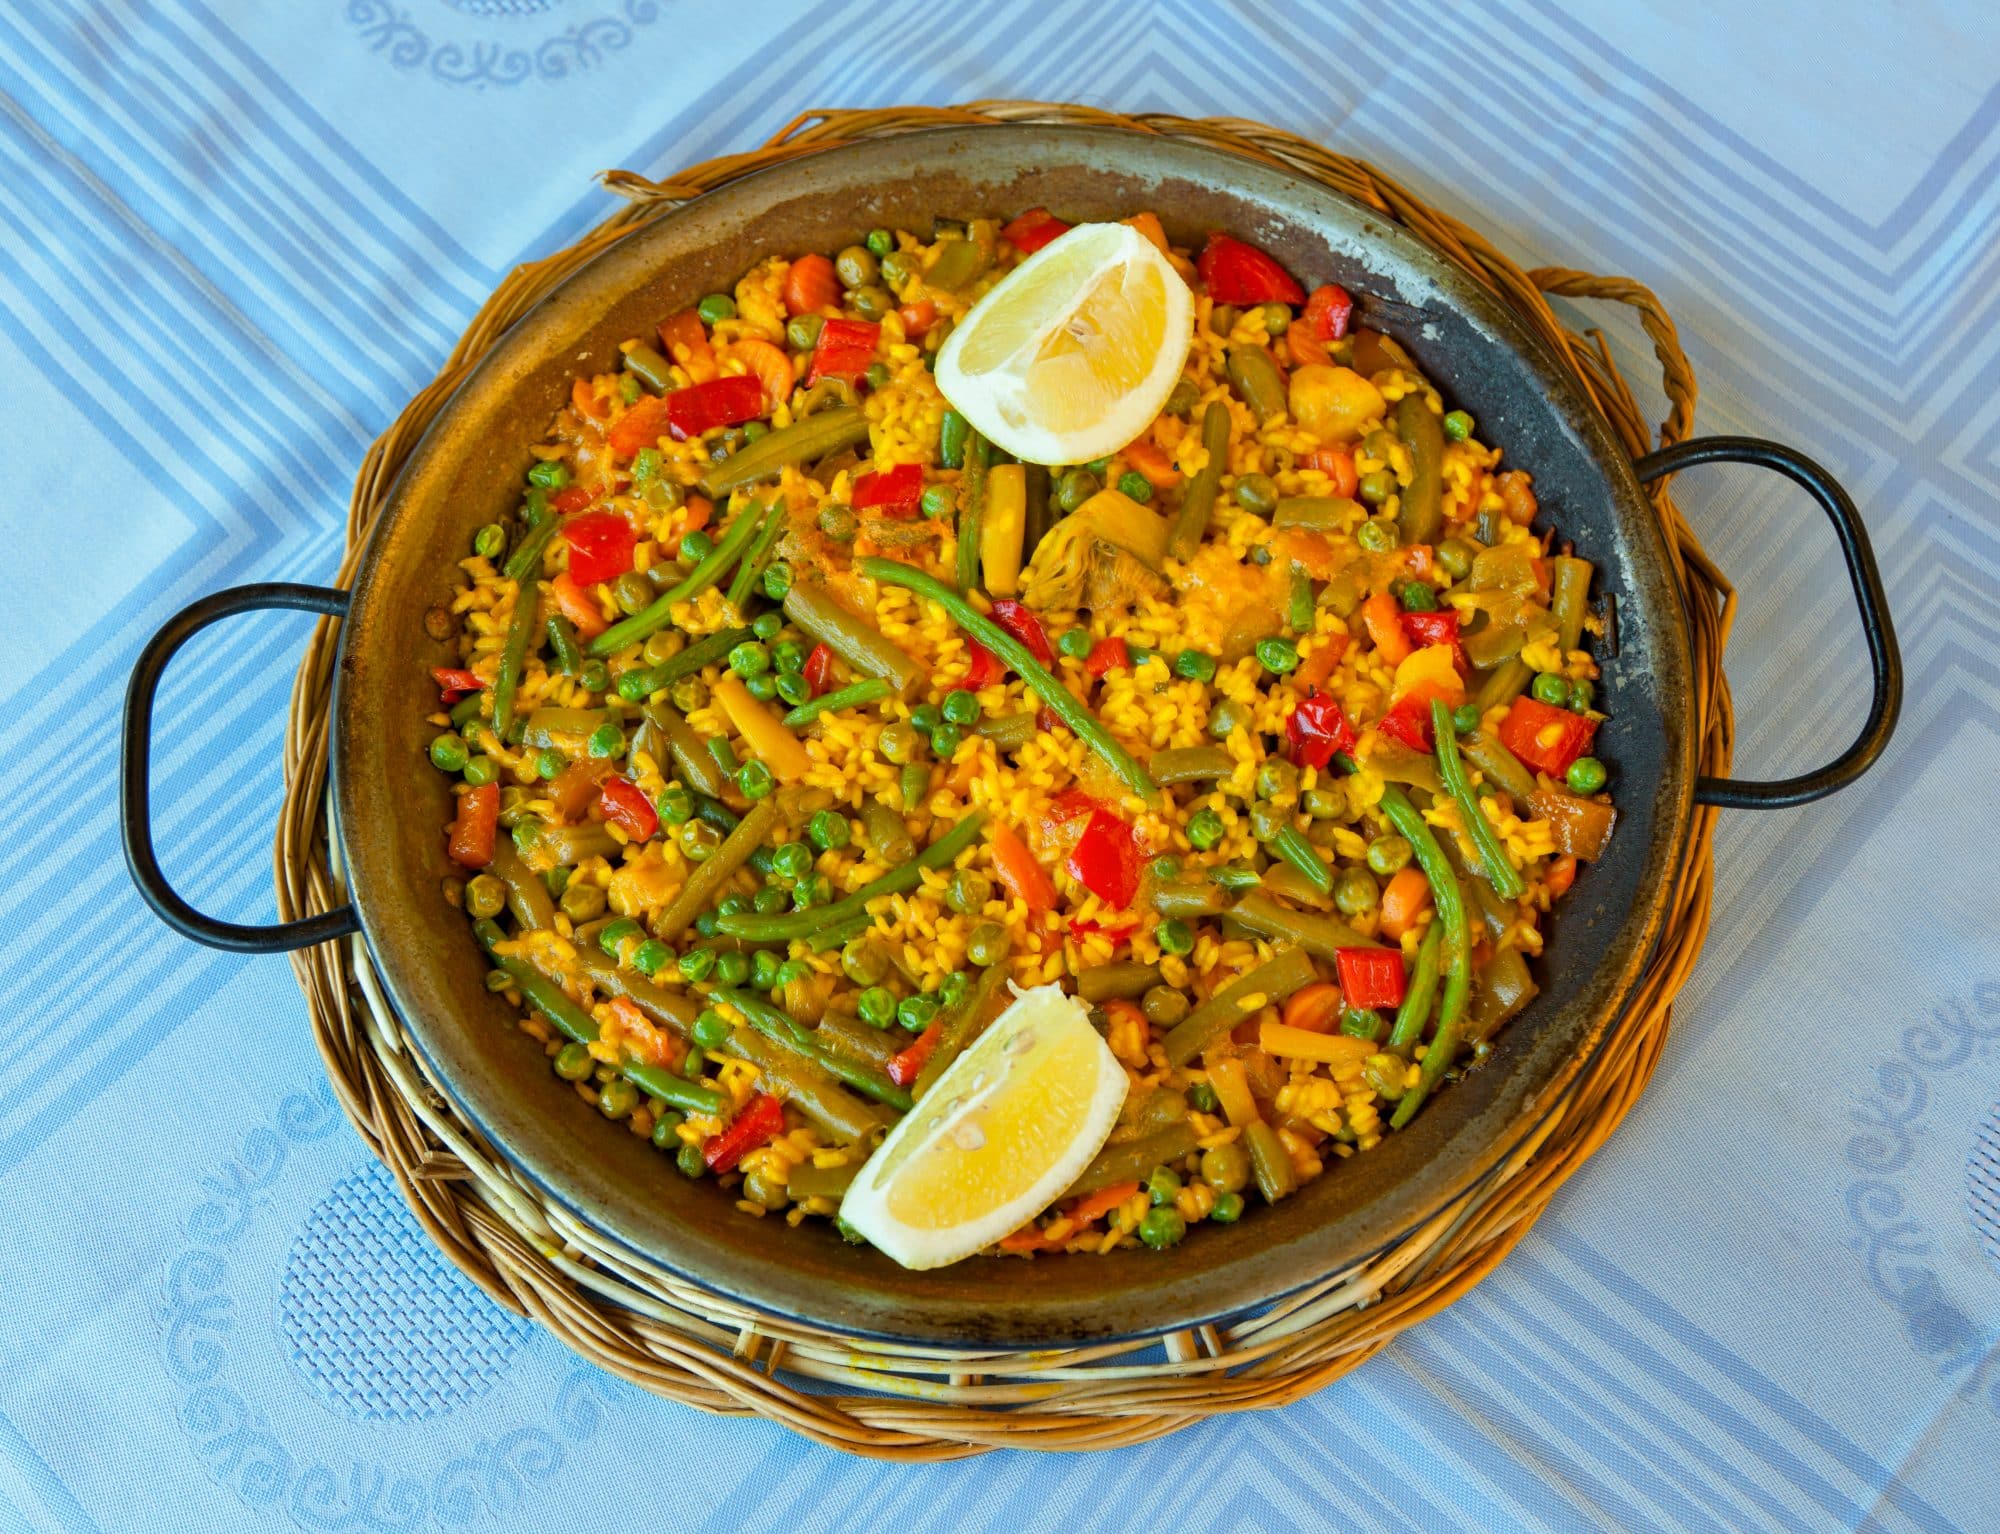 Vegan paella with rice and some vegetables.